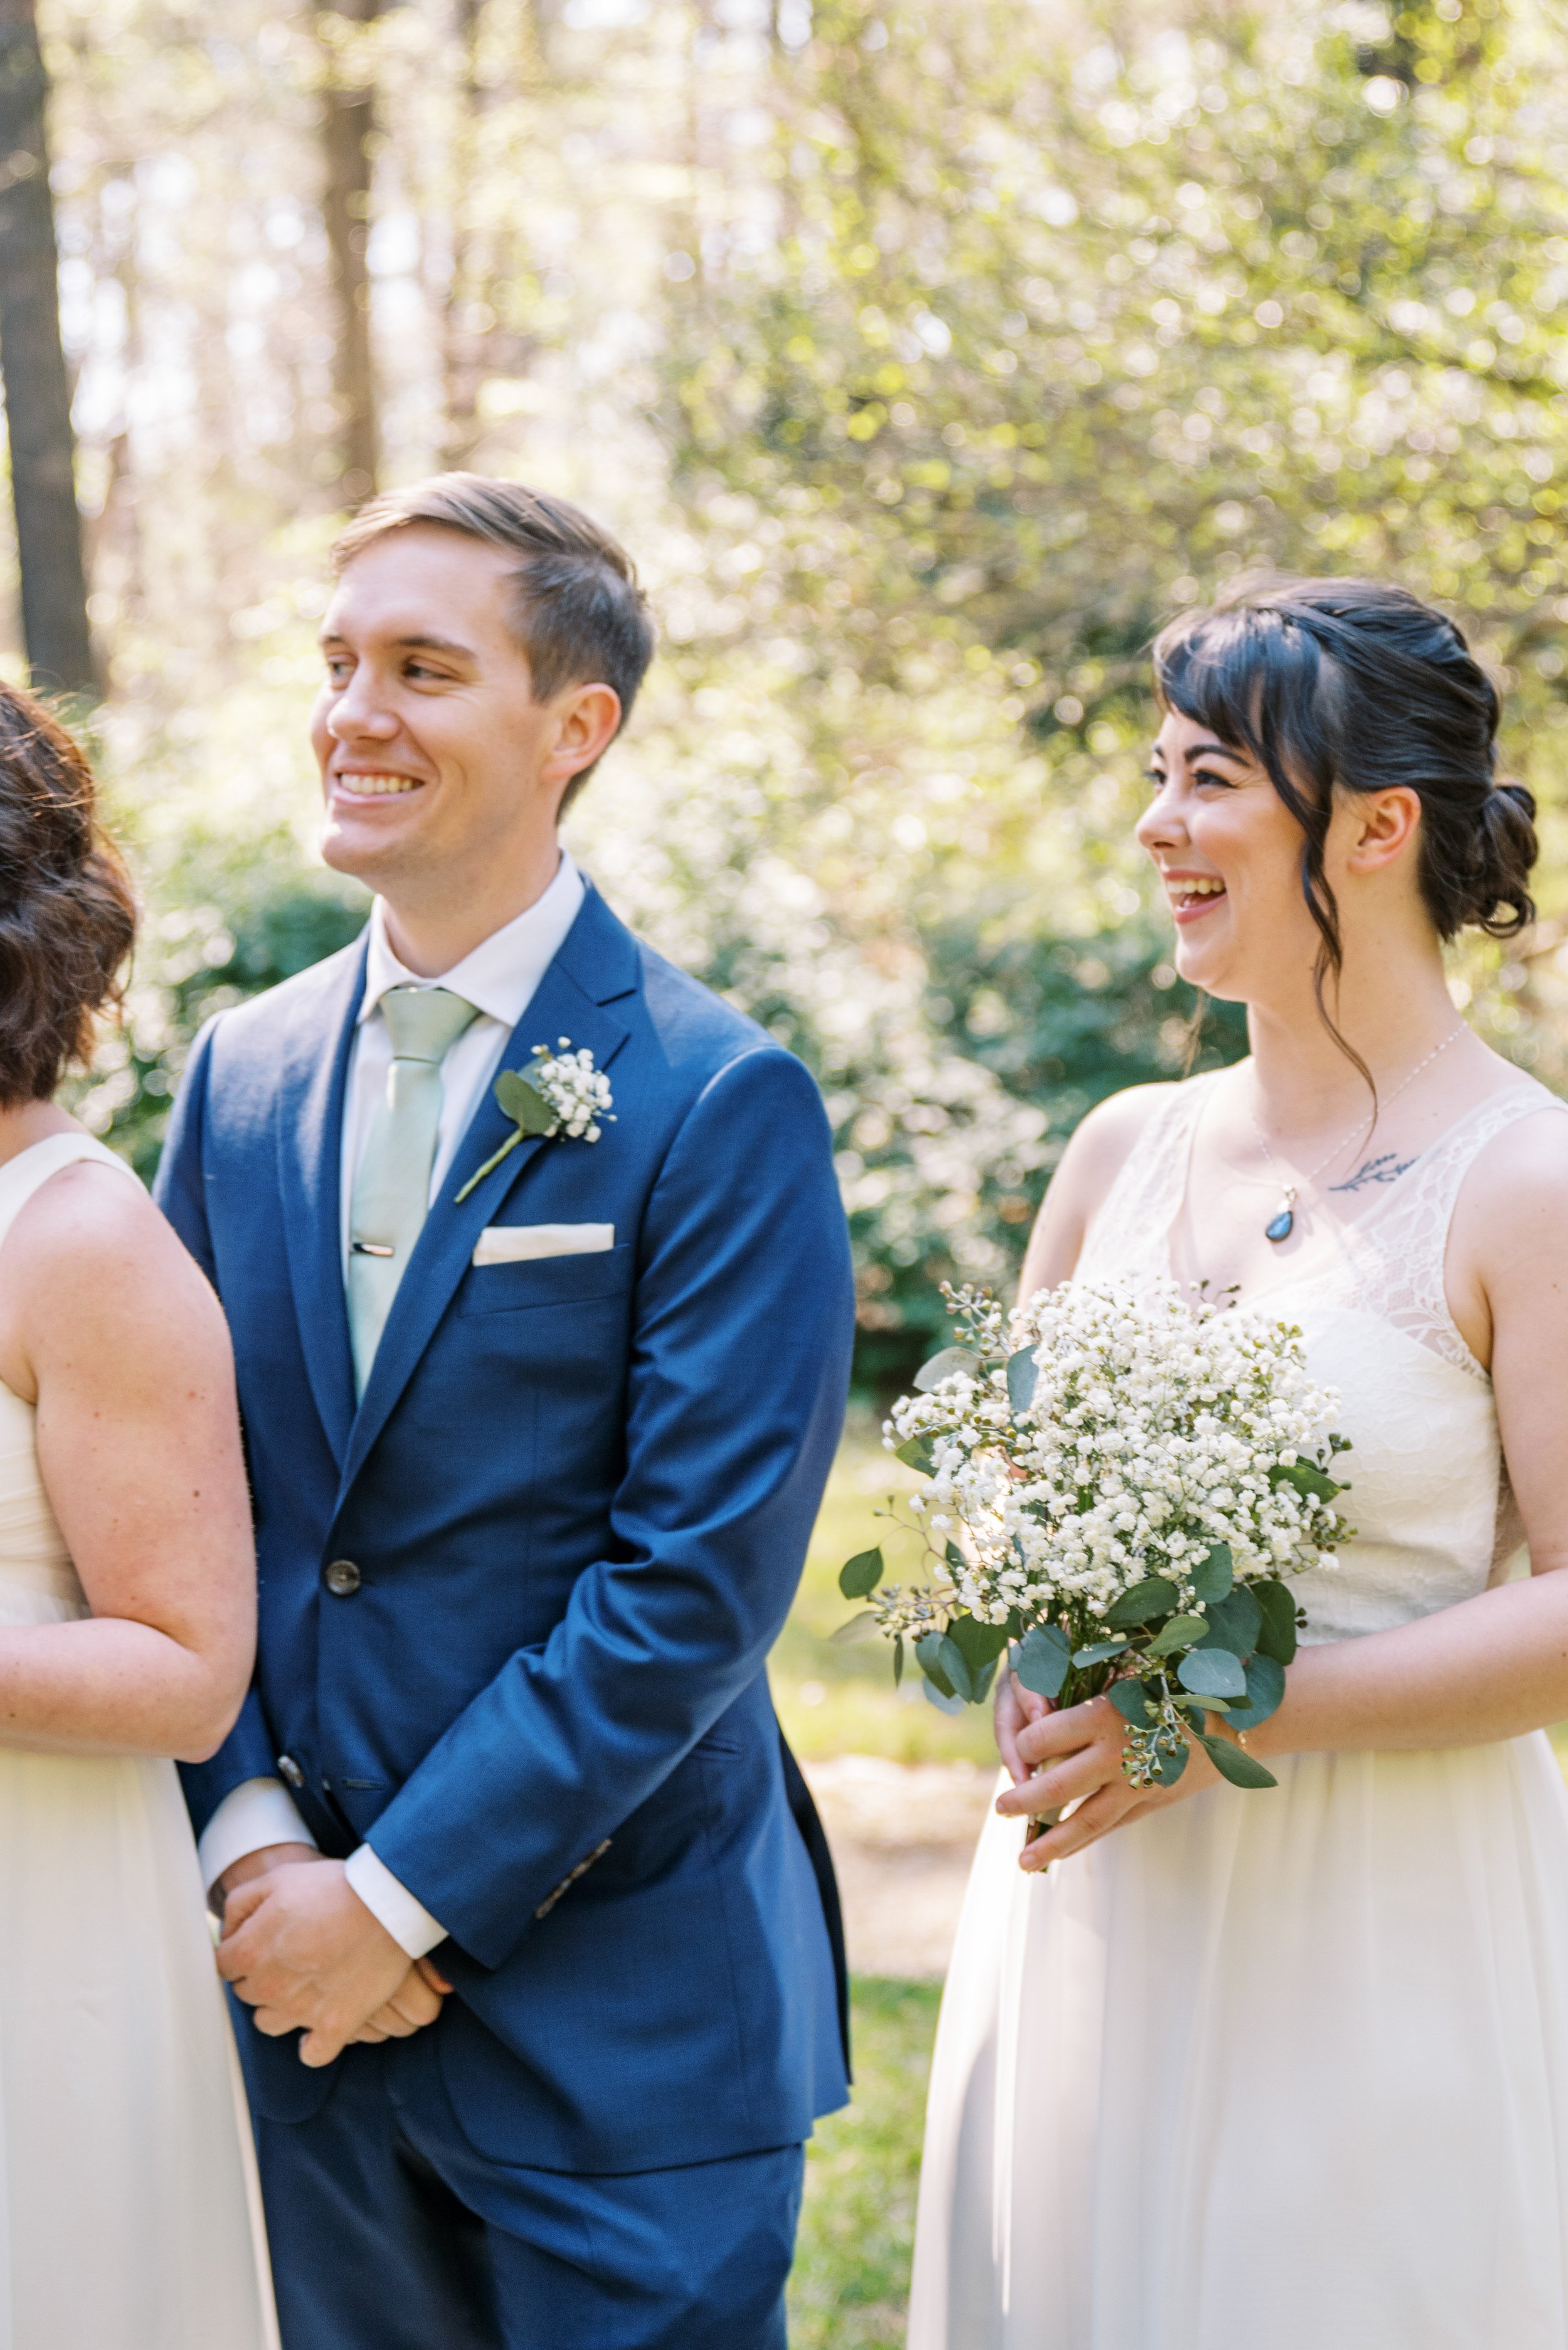 Candid Bridal Party Photos Cape Fear Botanical Garden Wedding Fancy This Photography